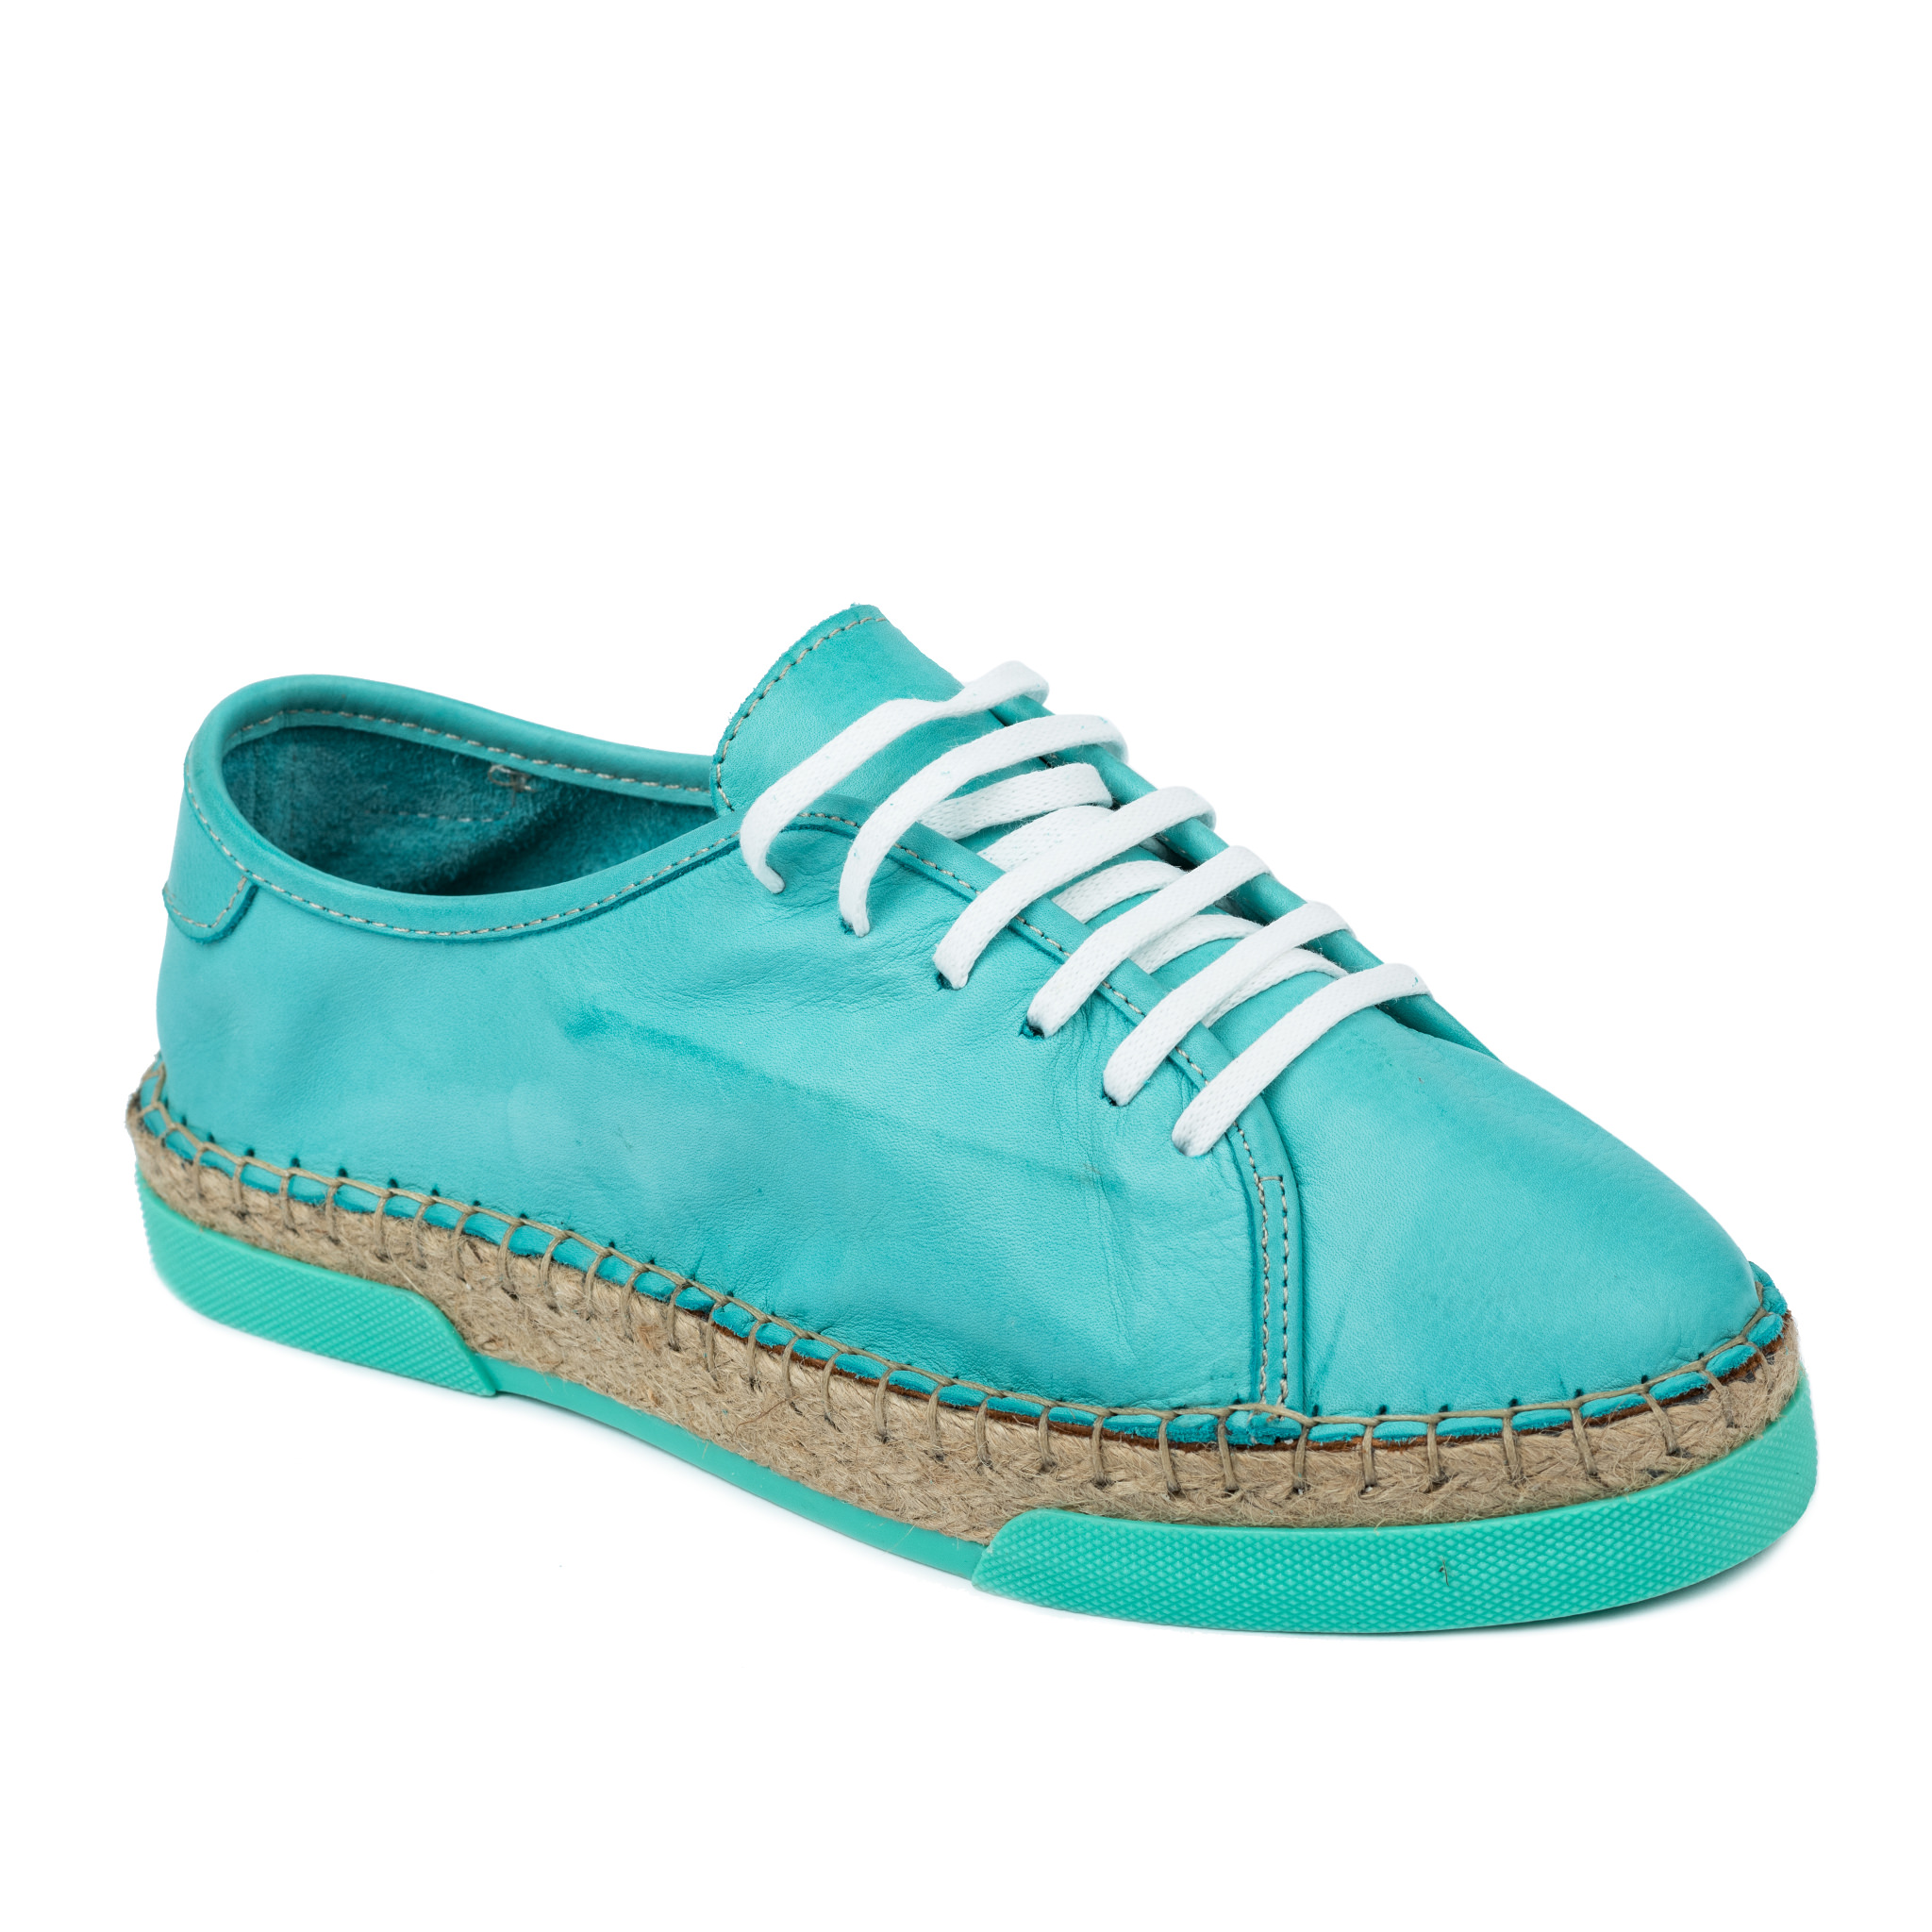 Women sneakers A545 - TURQUOISE